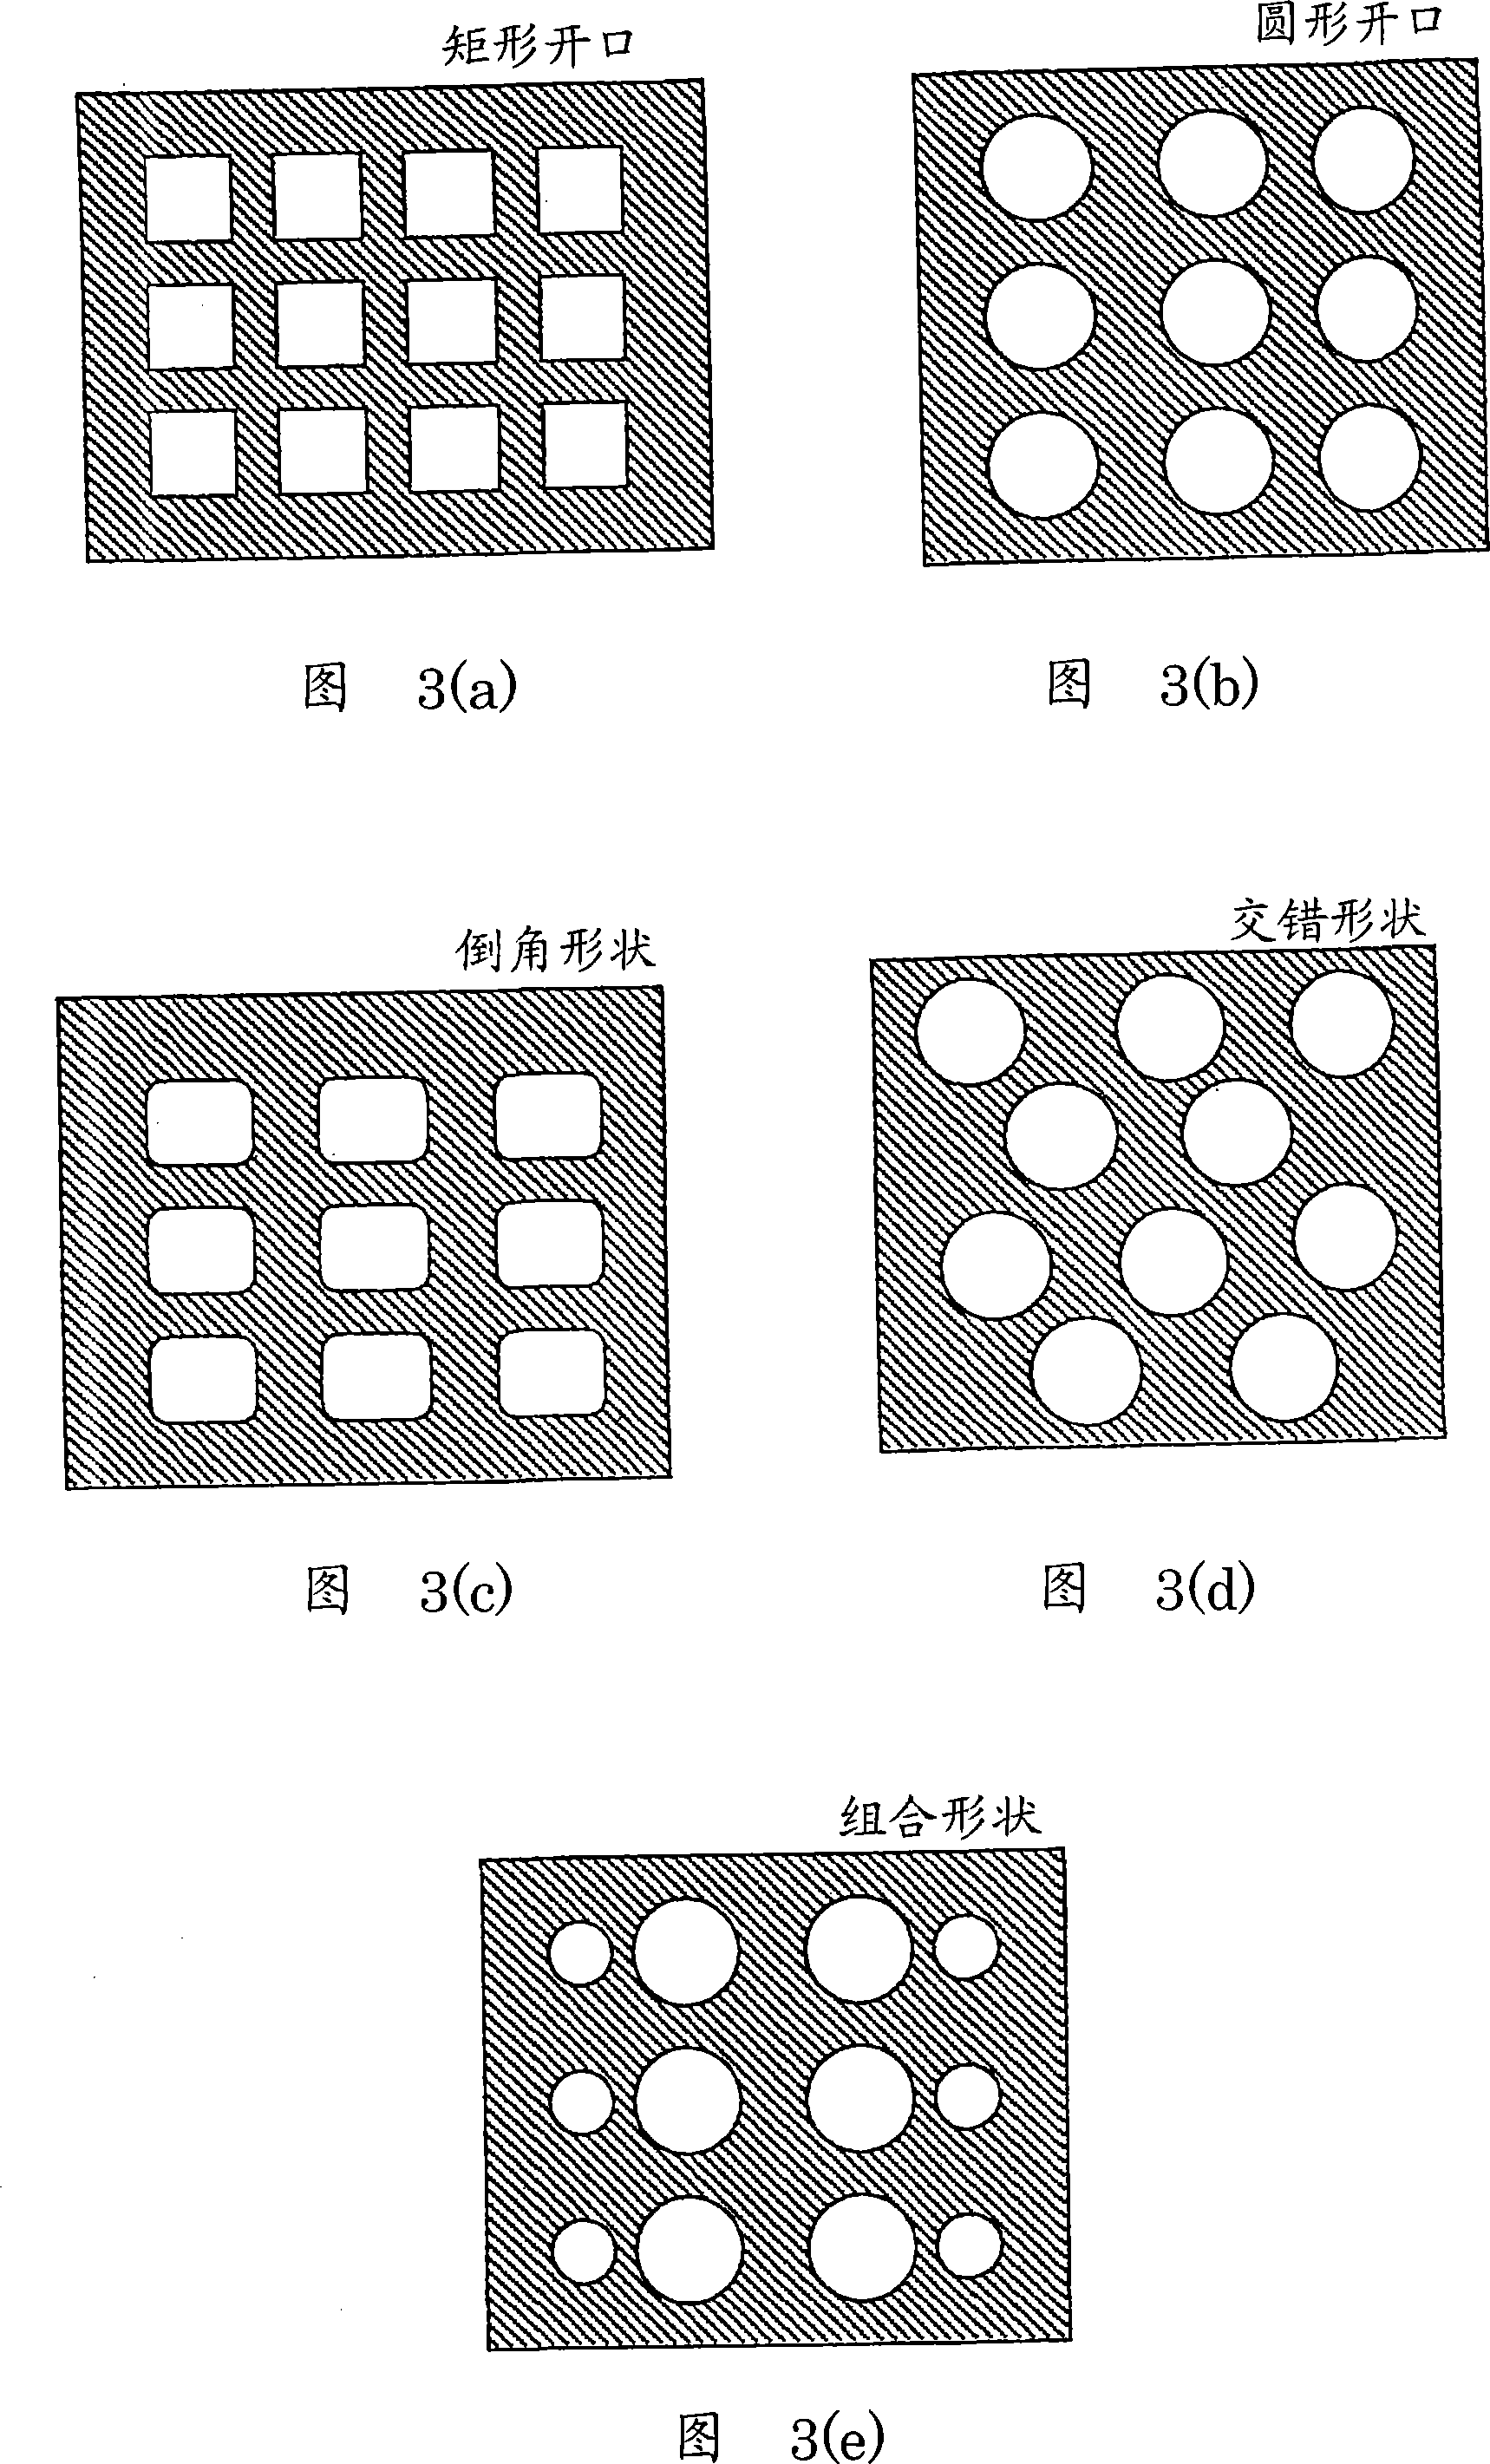 Flex-rigid wiring board and manufacturing method thereof